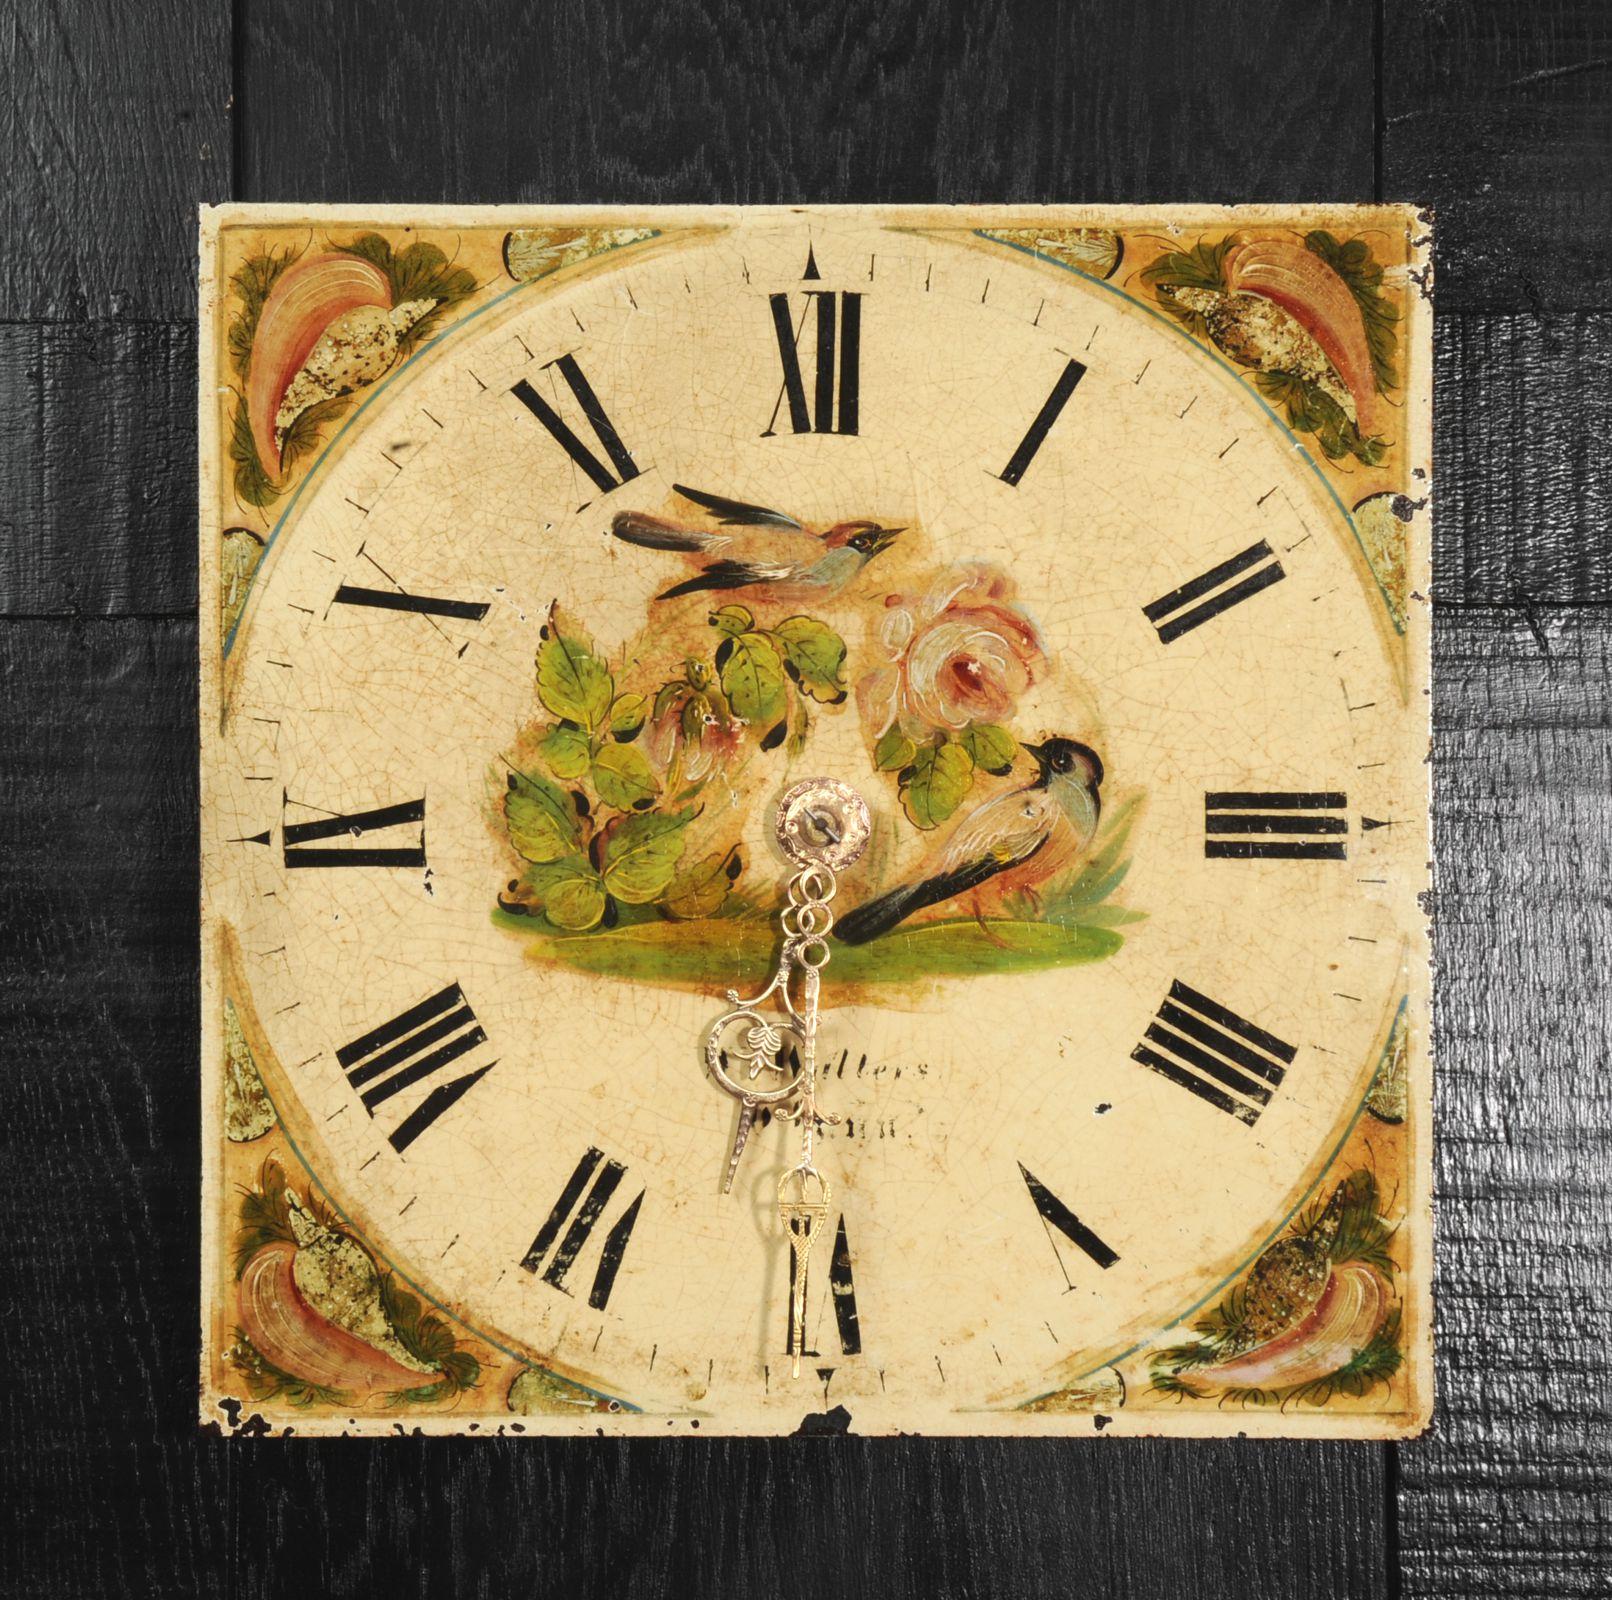 A lovely antique iron clock dial circa 1830 in its original enamel, charmingly decorated with birds and flowers. To the corners are charmingly painted shell motifs. With ancient craquelure, marks of a long life and its original handcut brass hands,